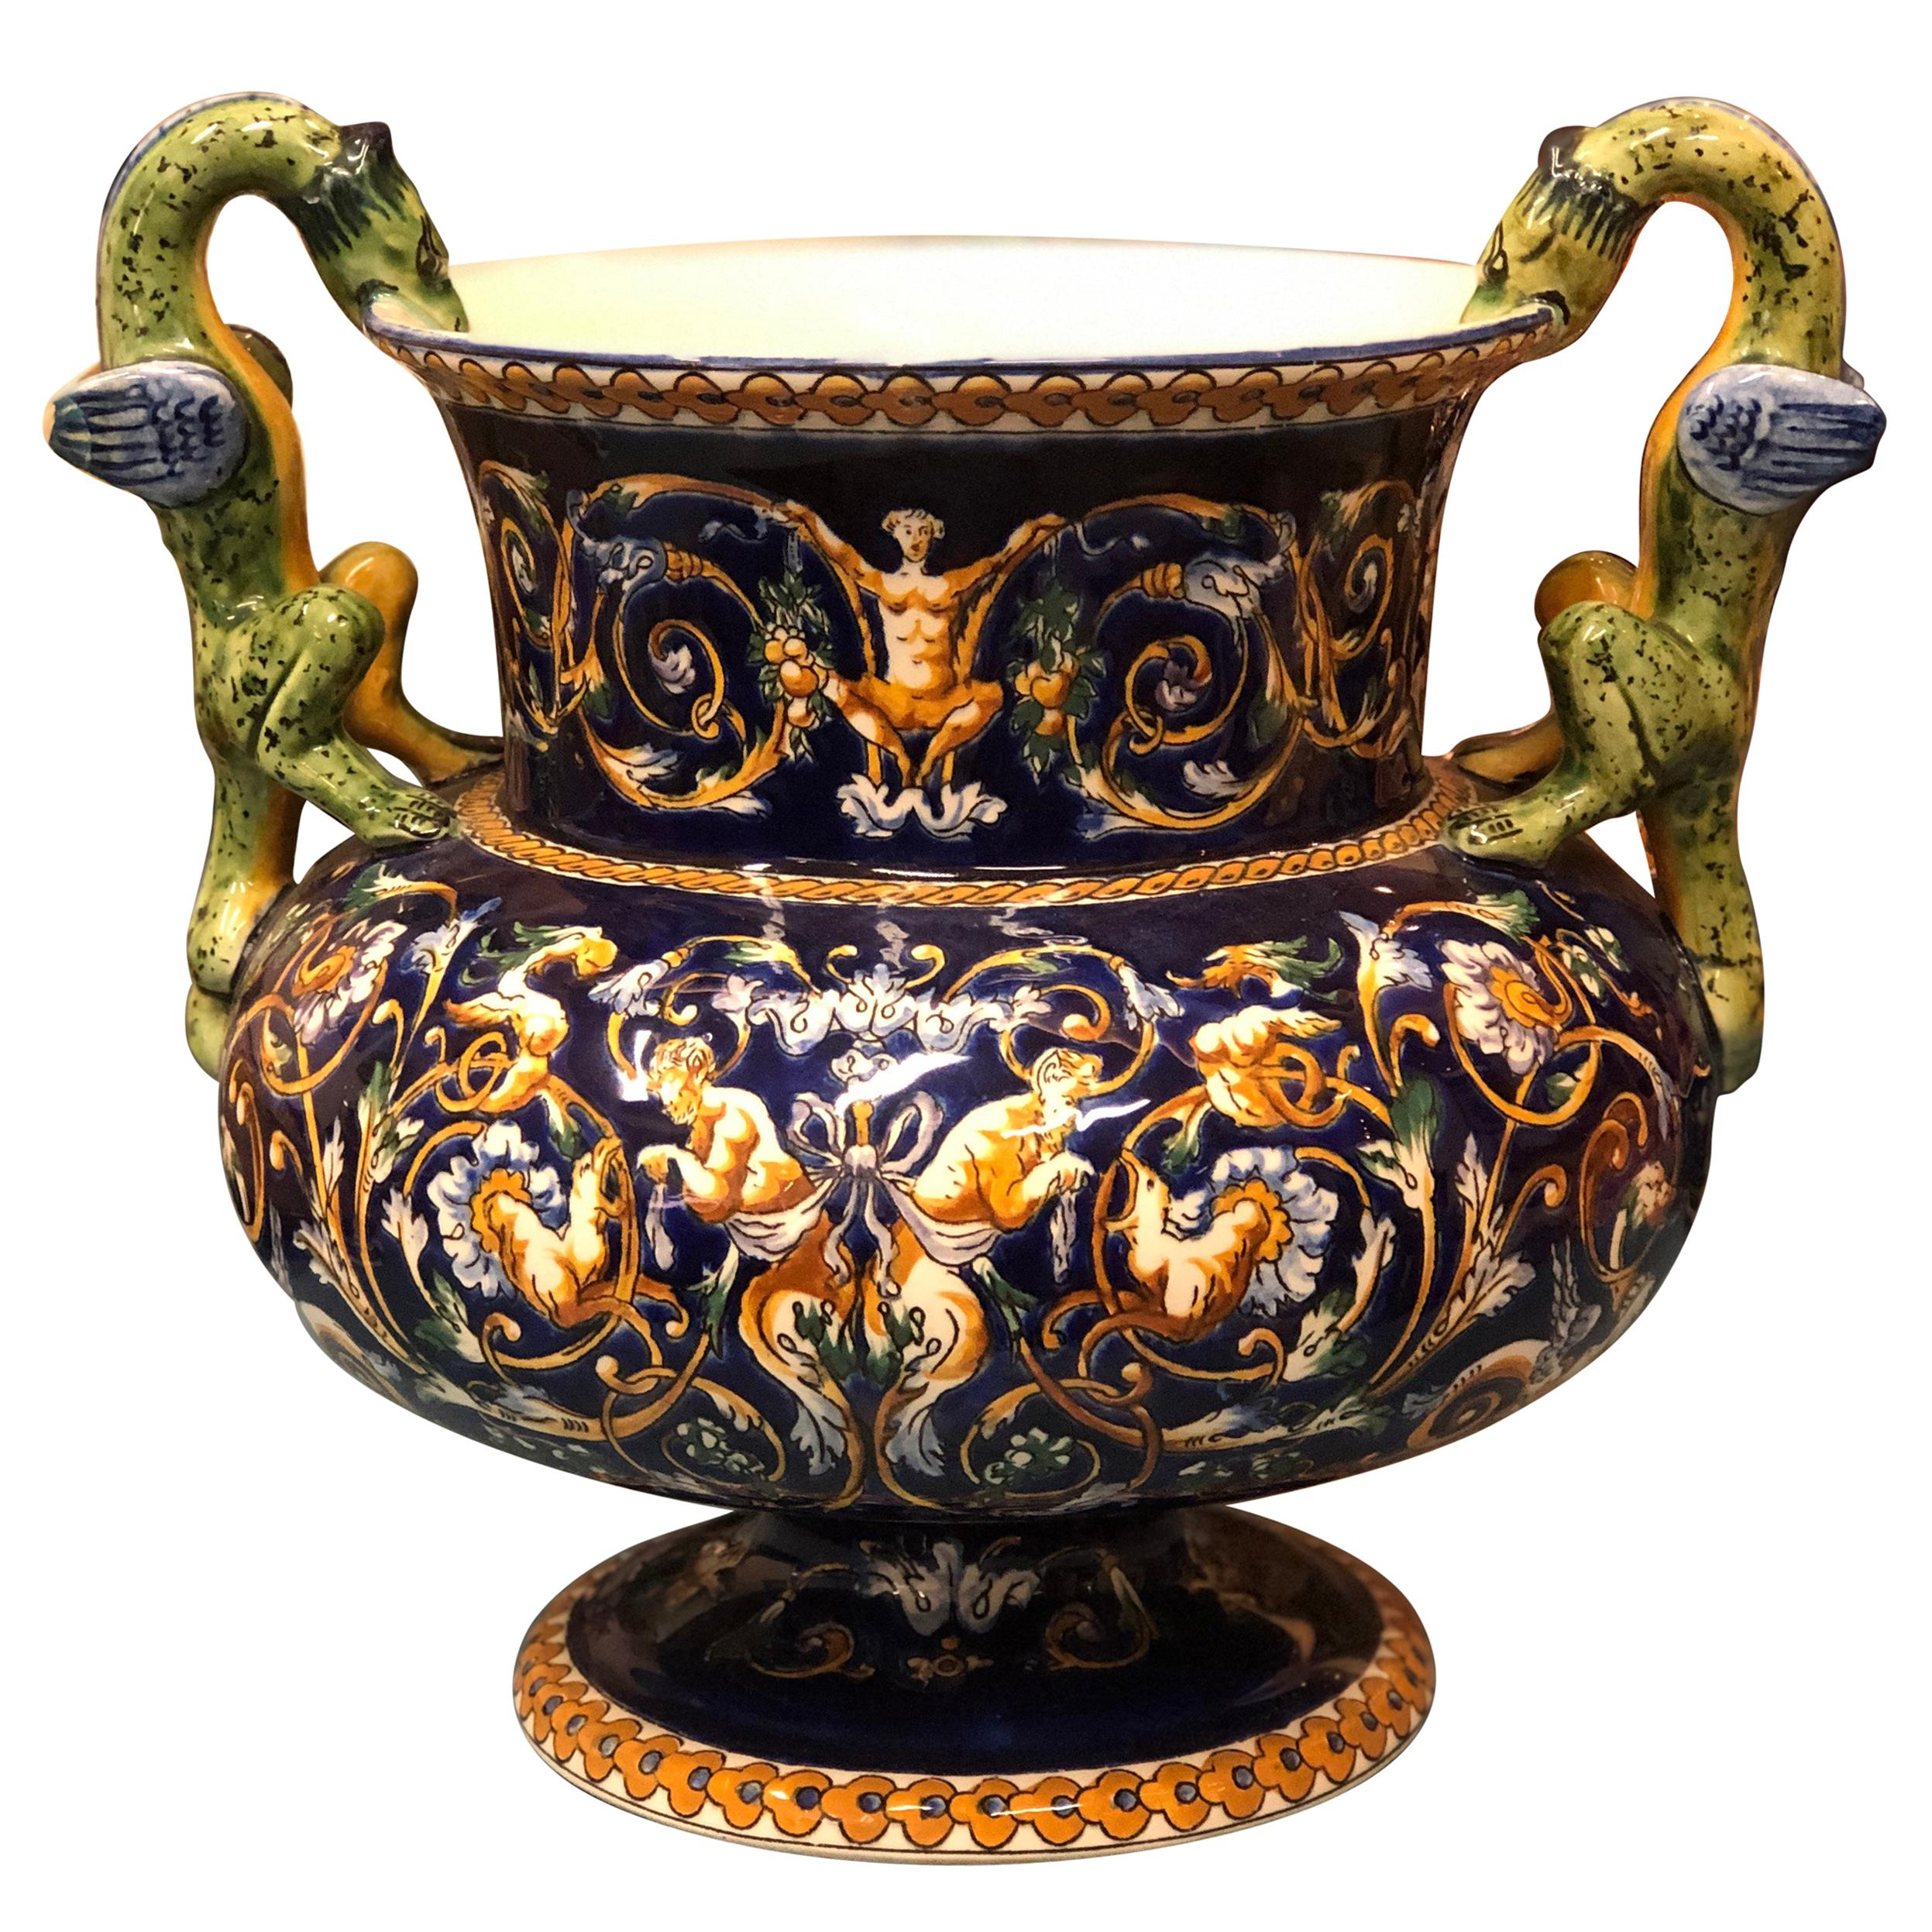 19th Century French Gien Renaissance Ceramic Vase with Lizard's Handles